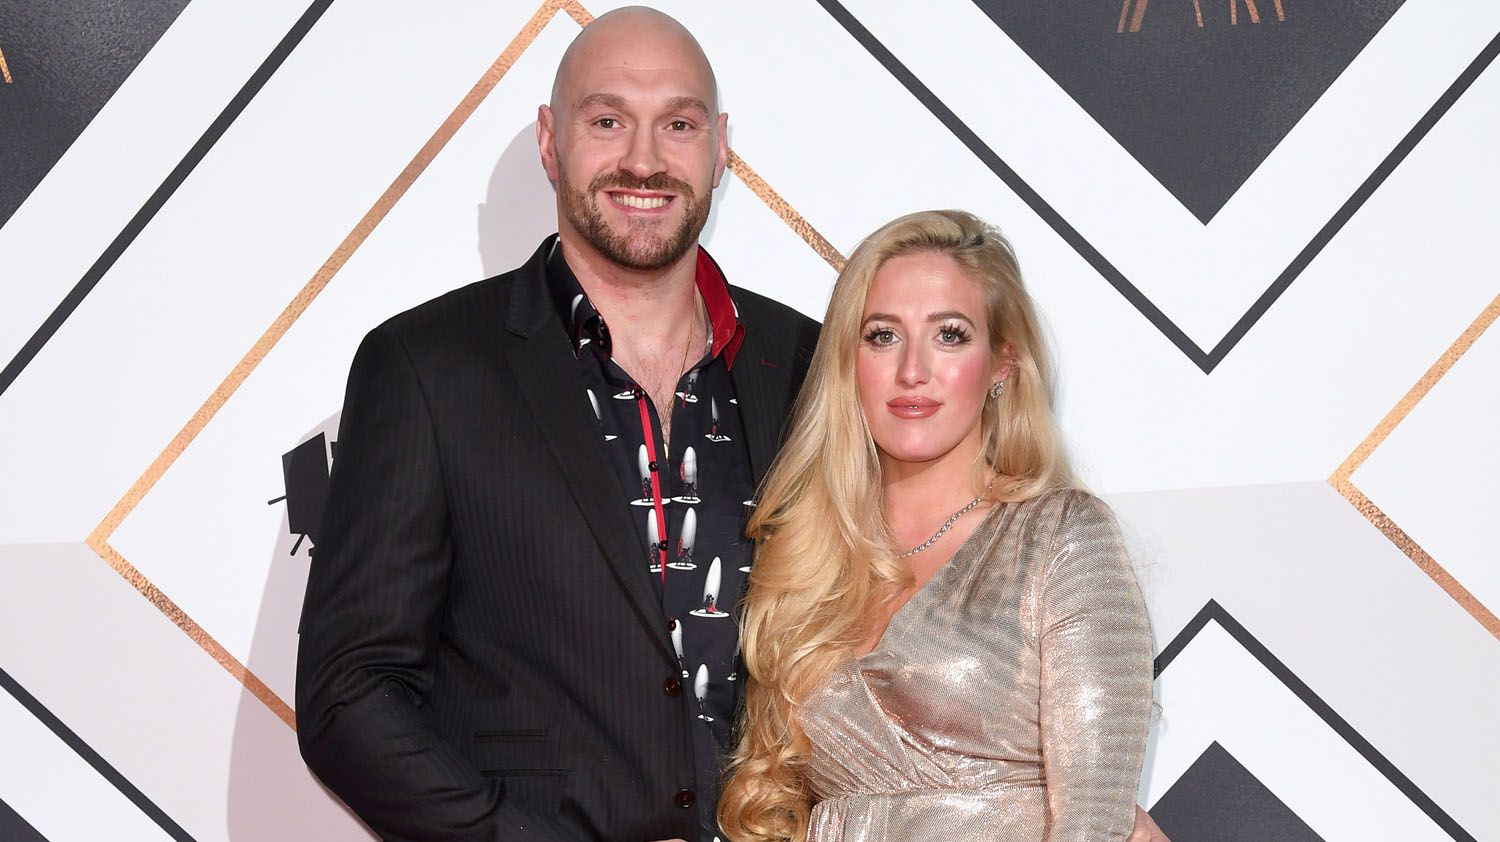 Tyson and Paris Fury welcome seventh child together